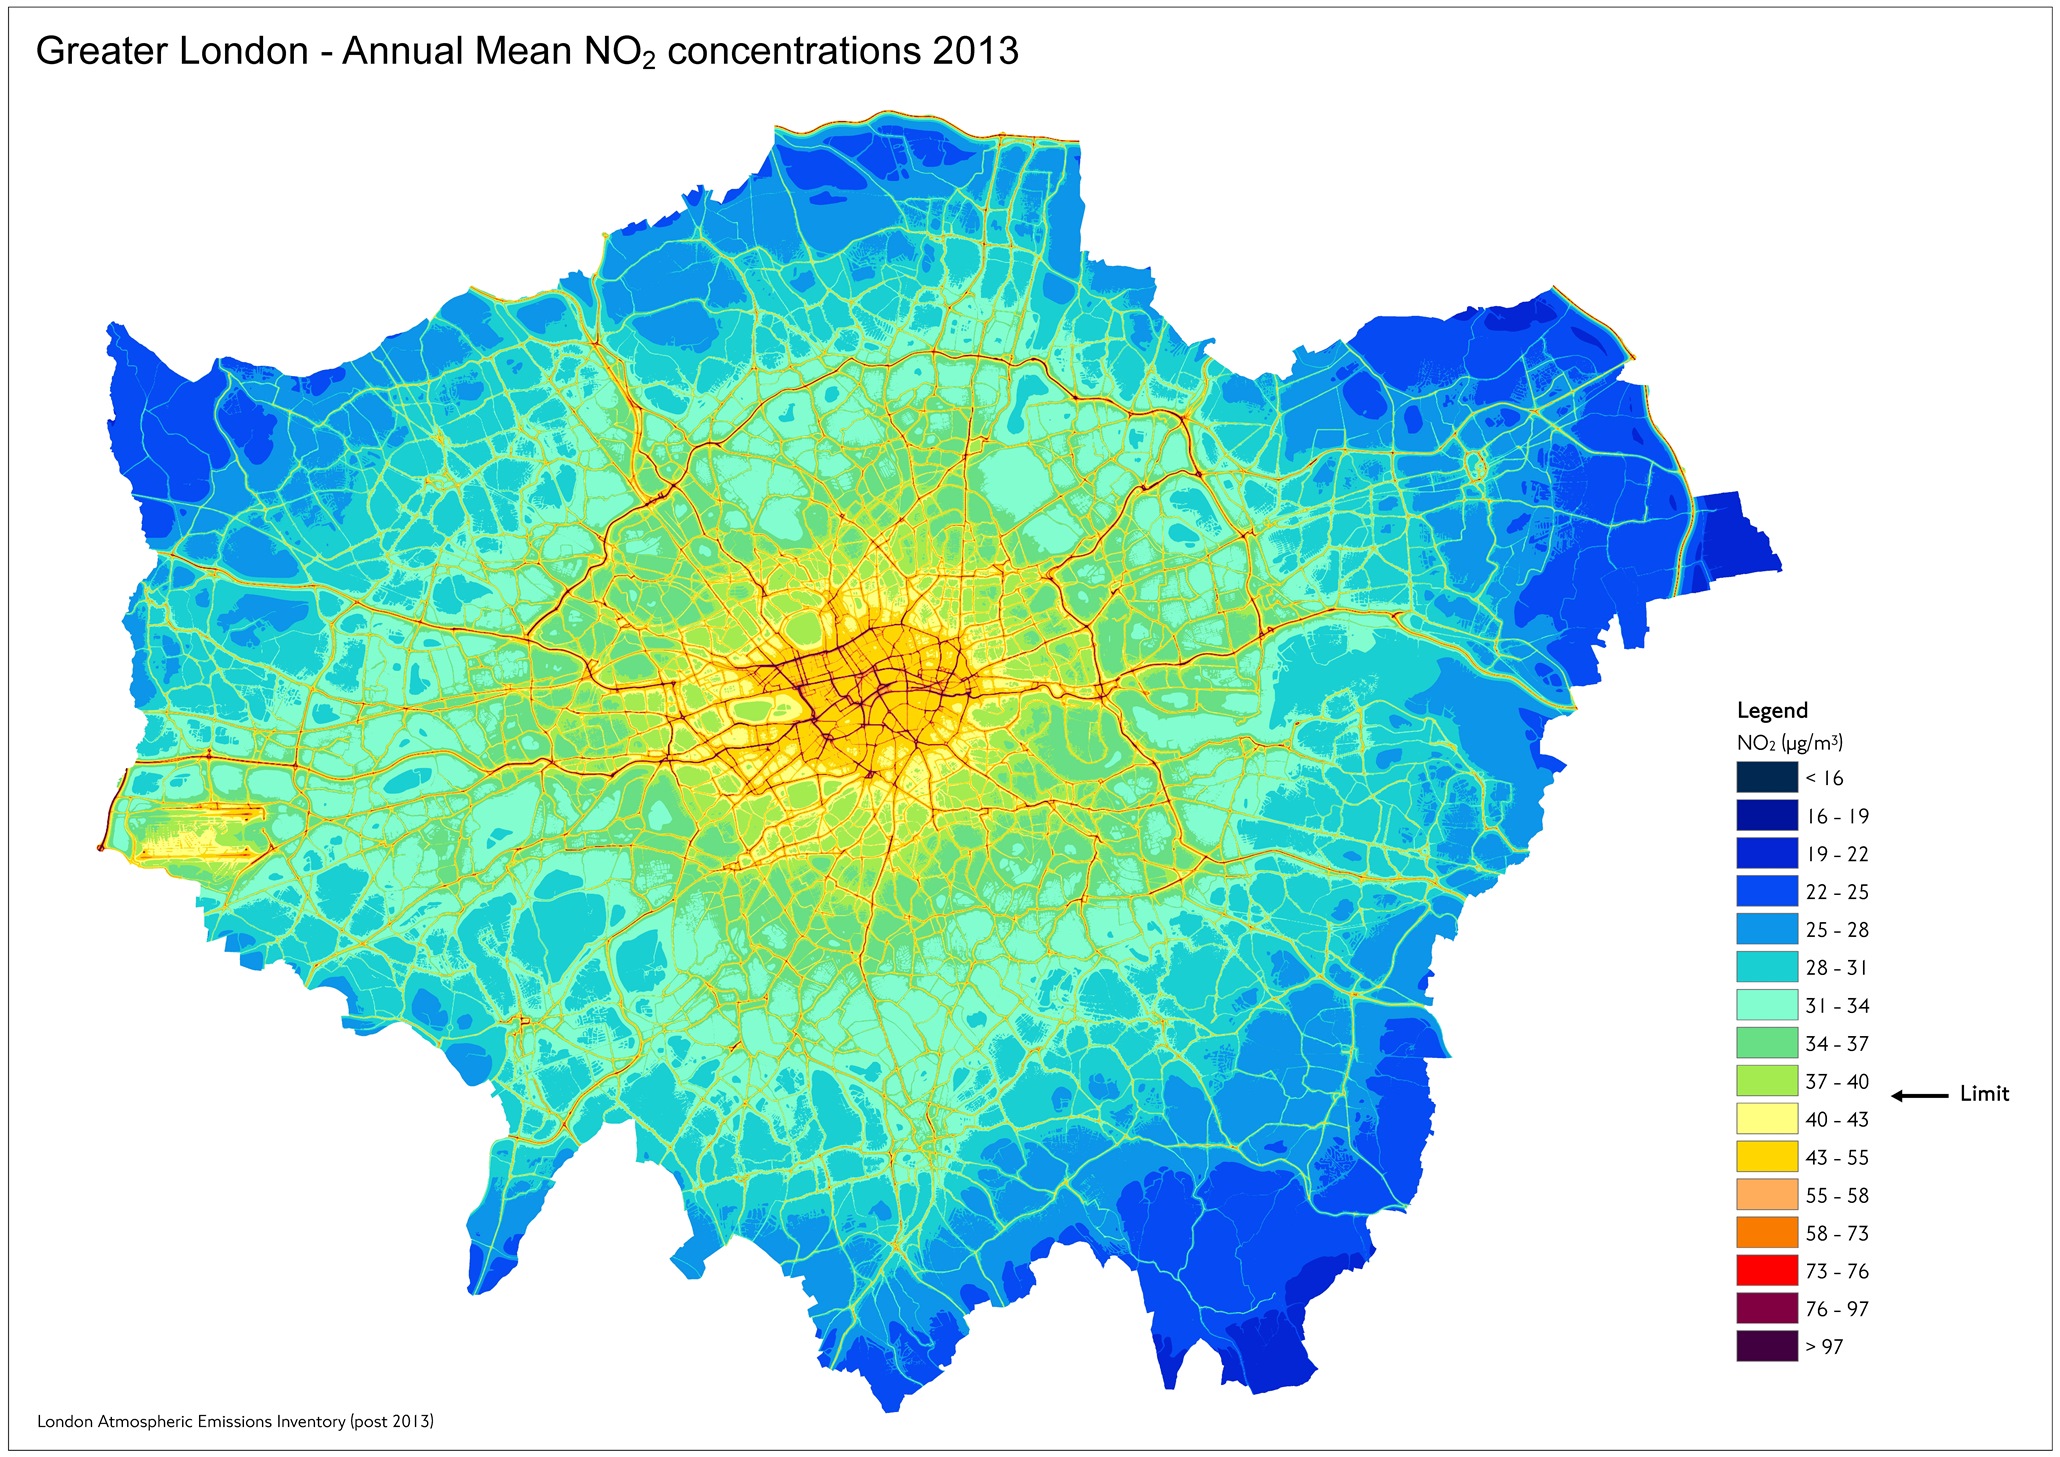 King’s and the London Air Quality Network tackling air pollution